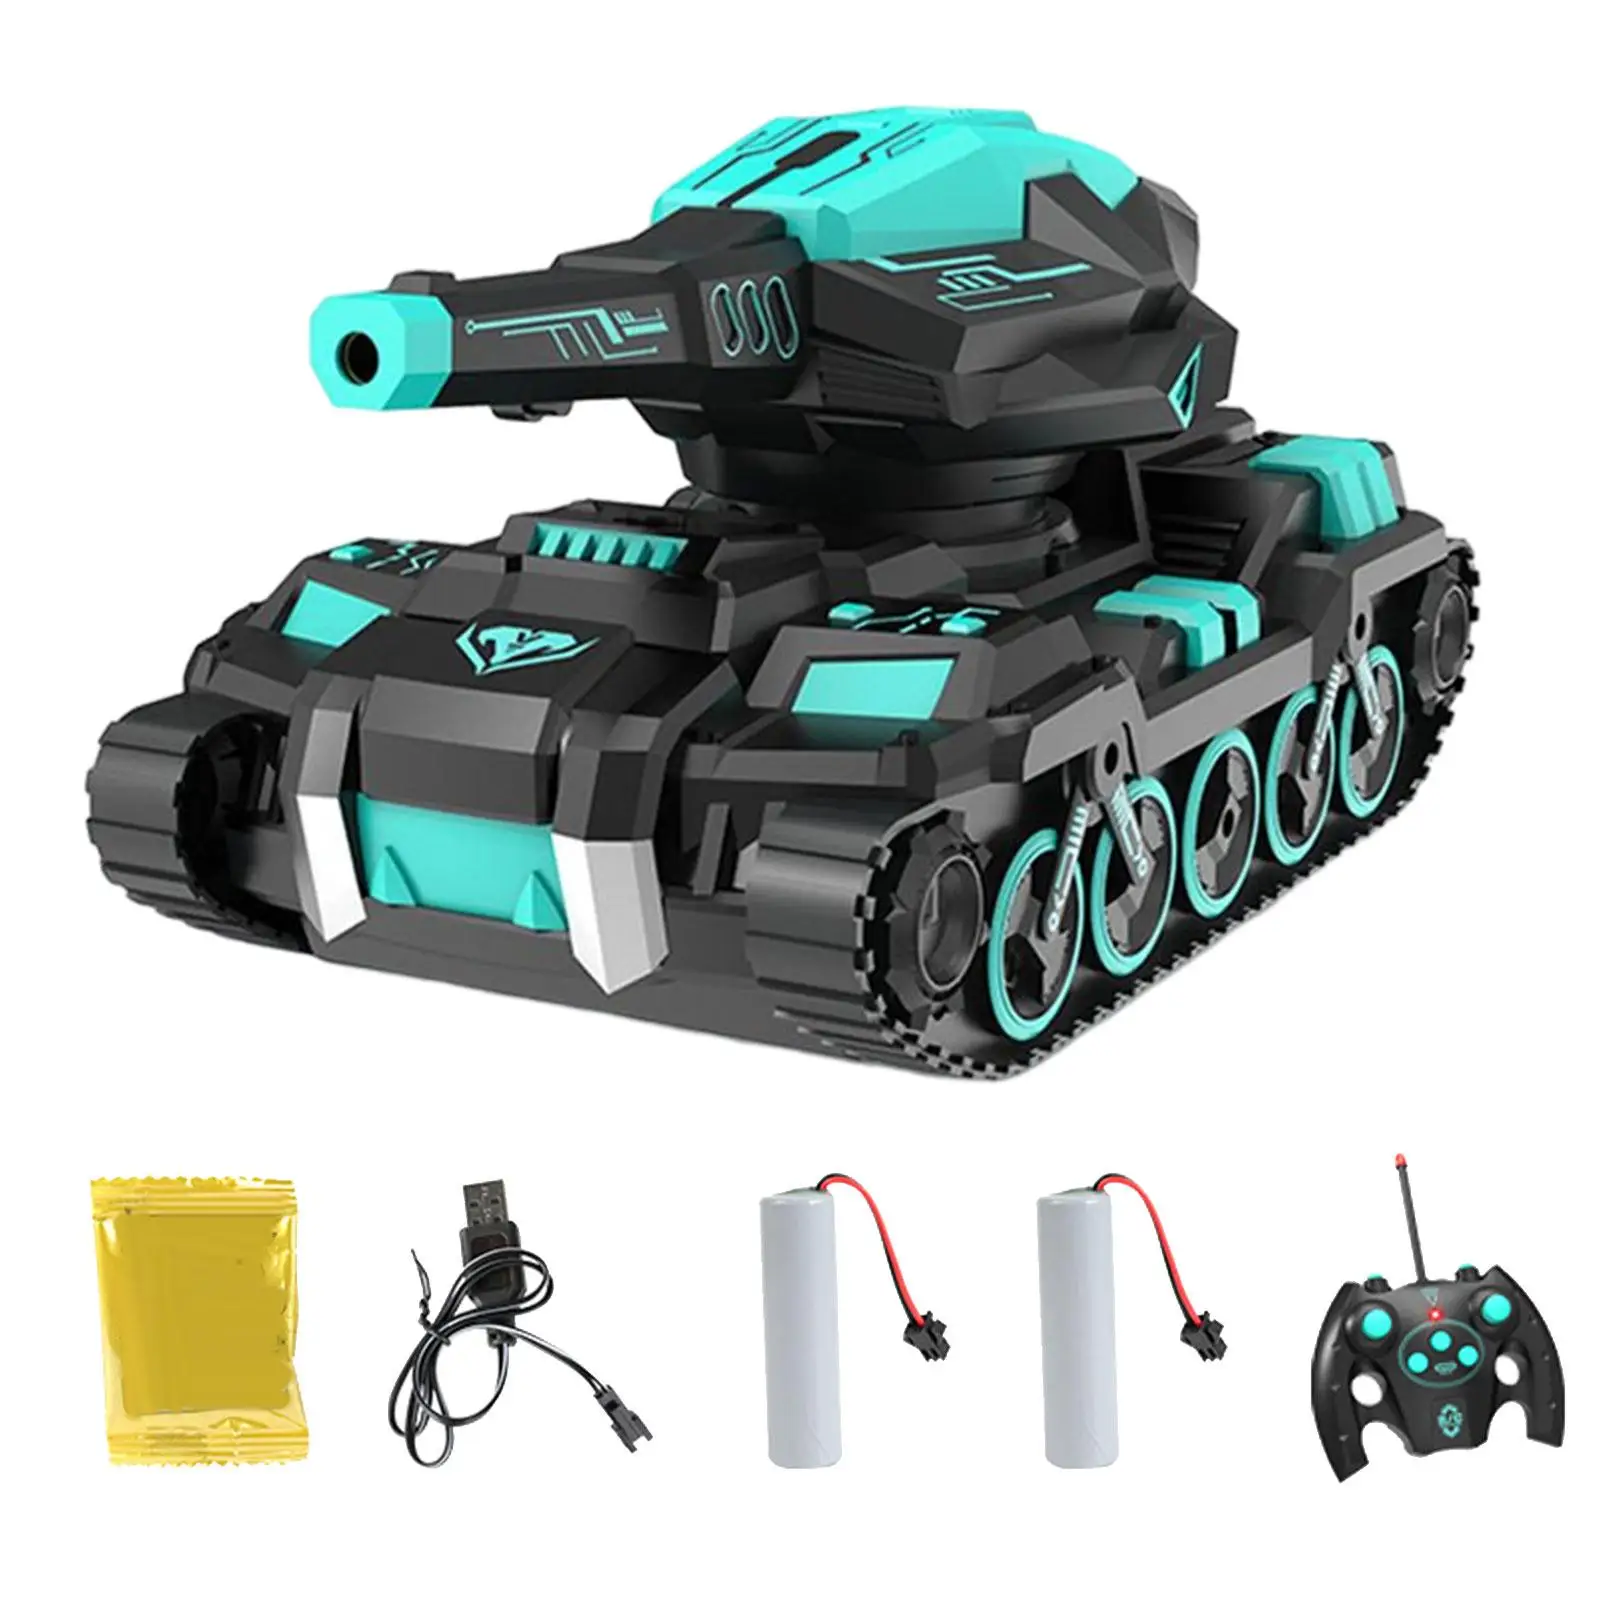 RC Tank 4WD Tank Hobby RC Cars drifting remote control Car for Grasslands